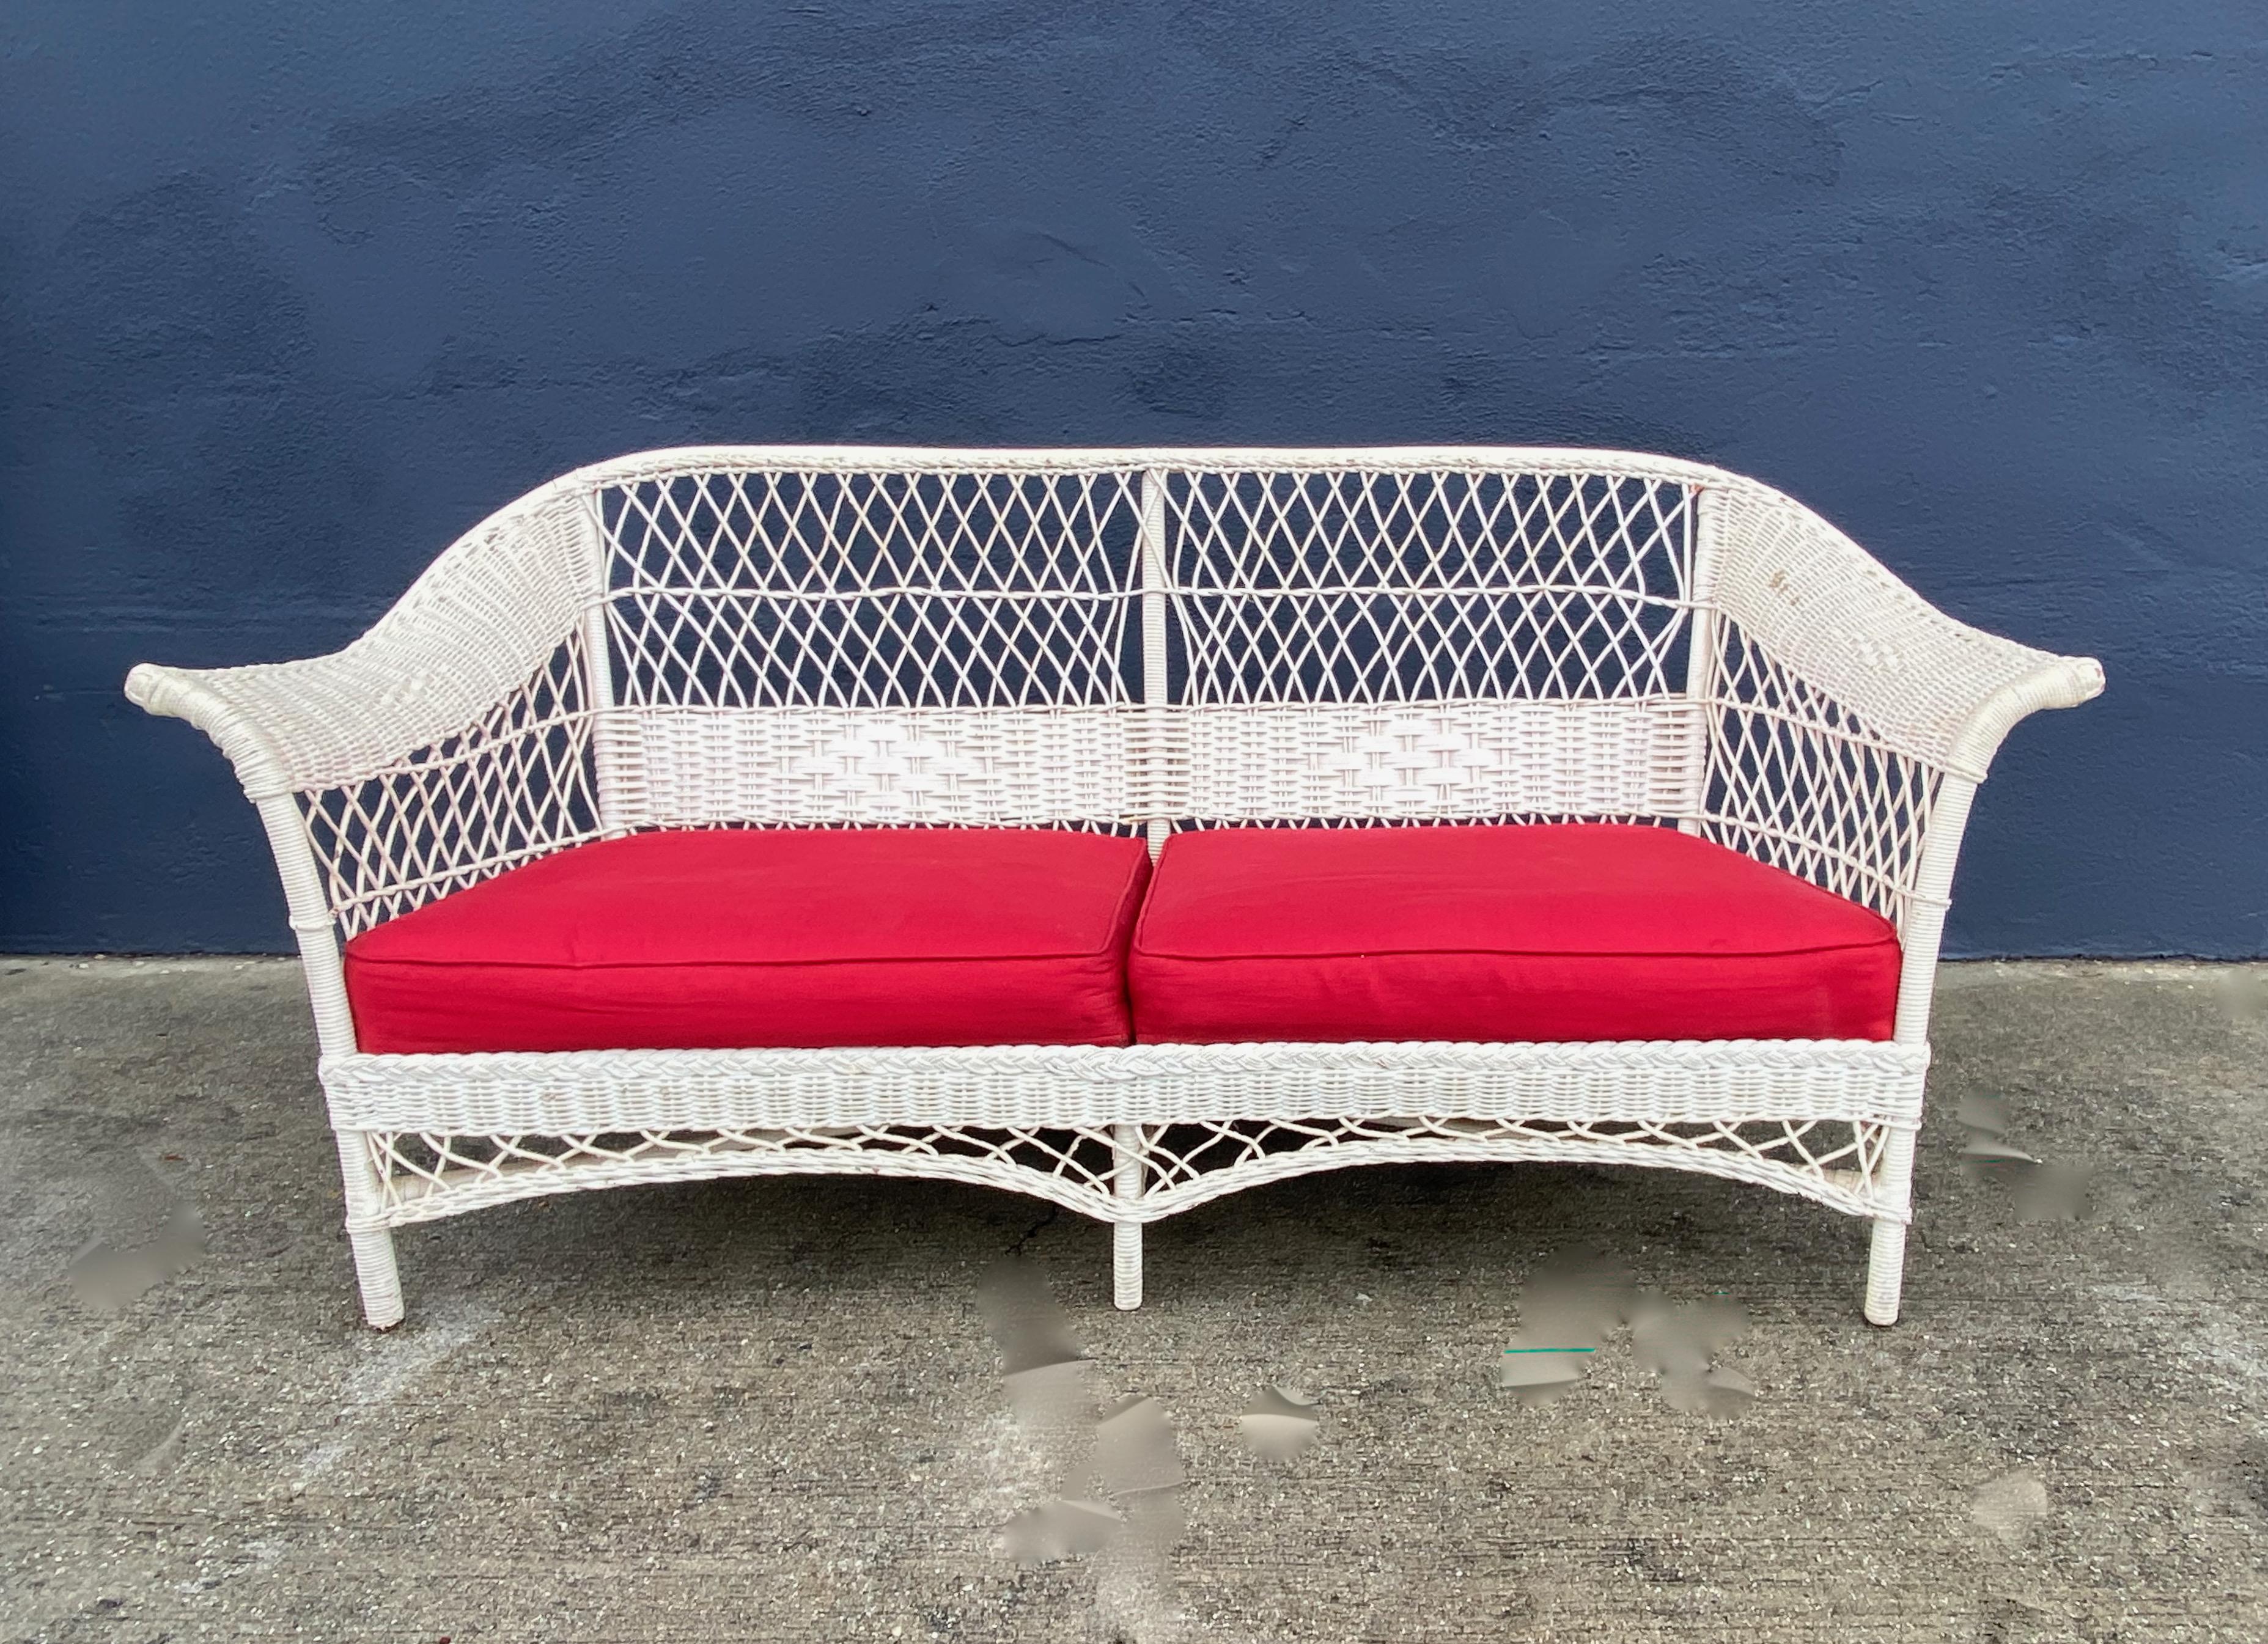 This is an iconic Bar Harbor Wicker sofa that dates to the first half of the 20th century. The sofa is a great example of the current Coastal Design trend and can be placed inside or out--if under a covered veranda or terrace. The sofa is in overall